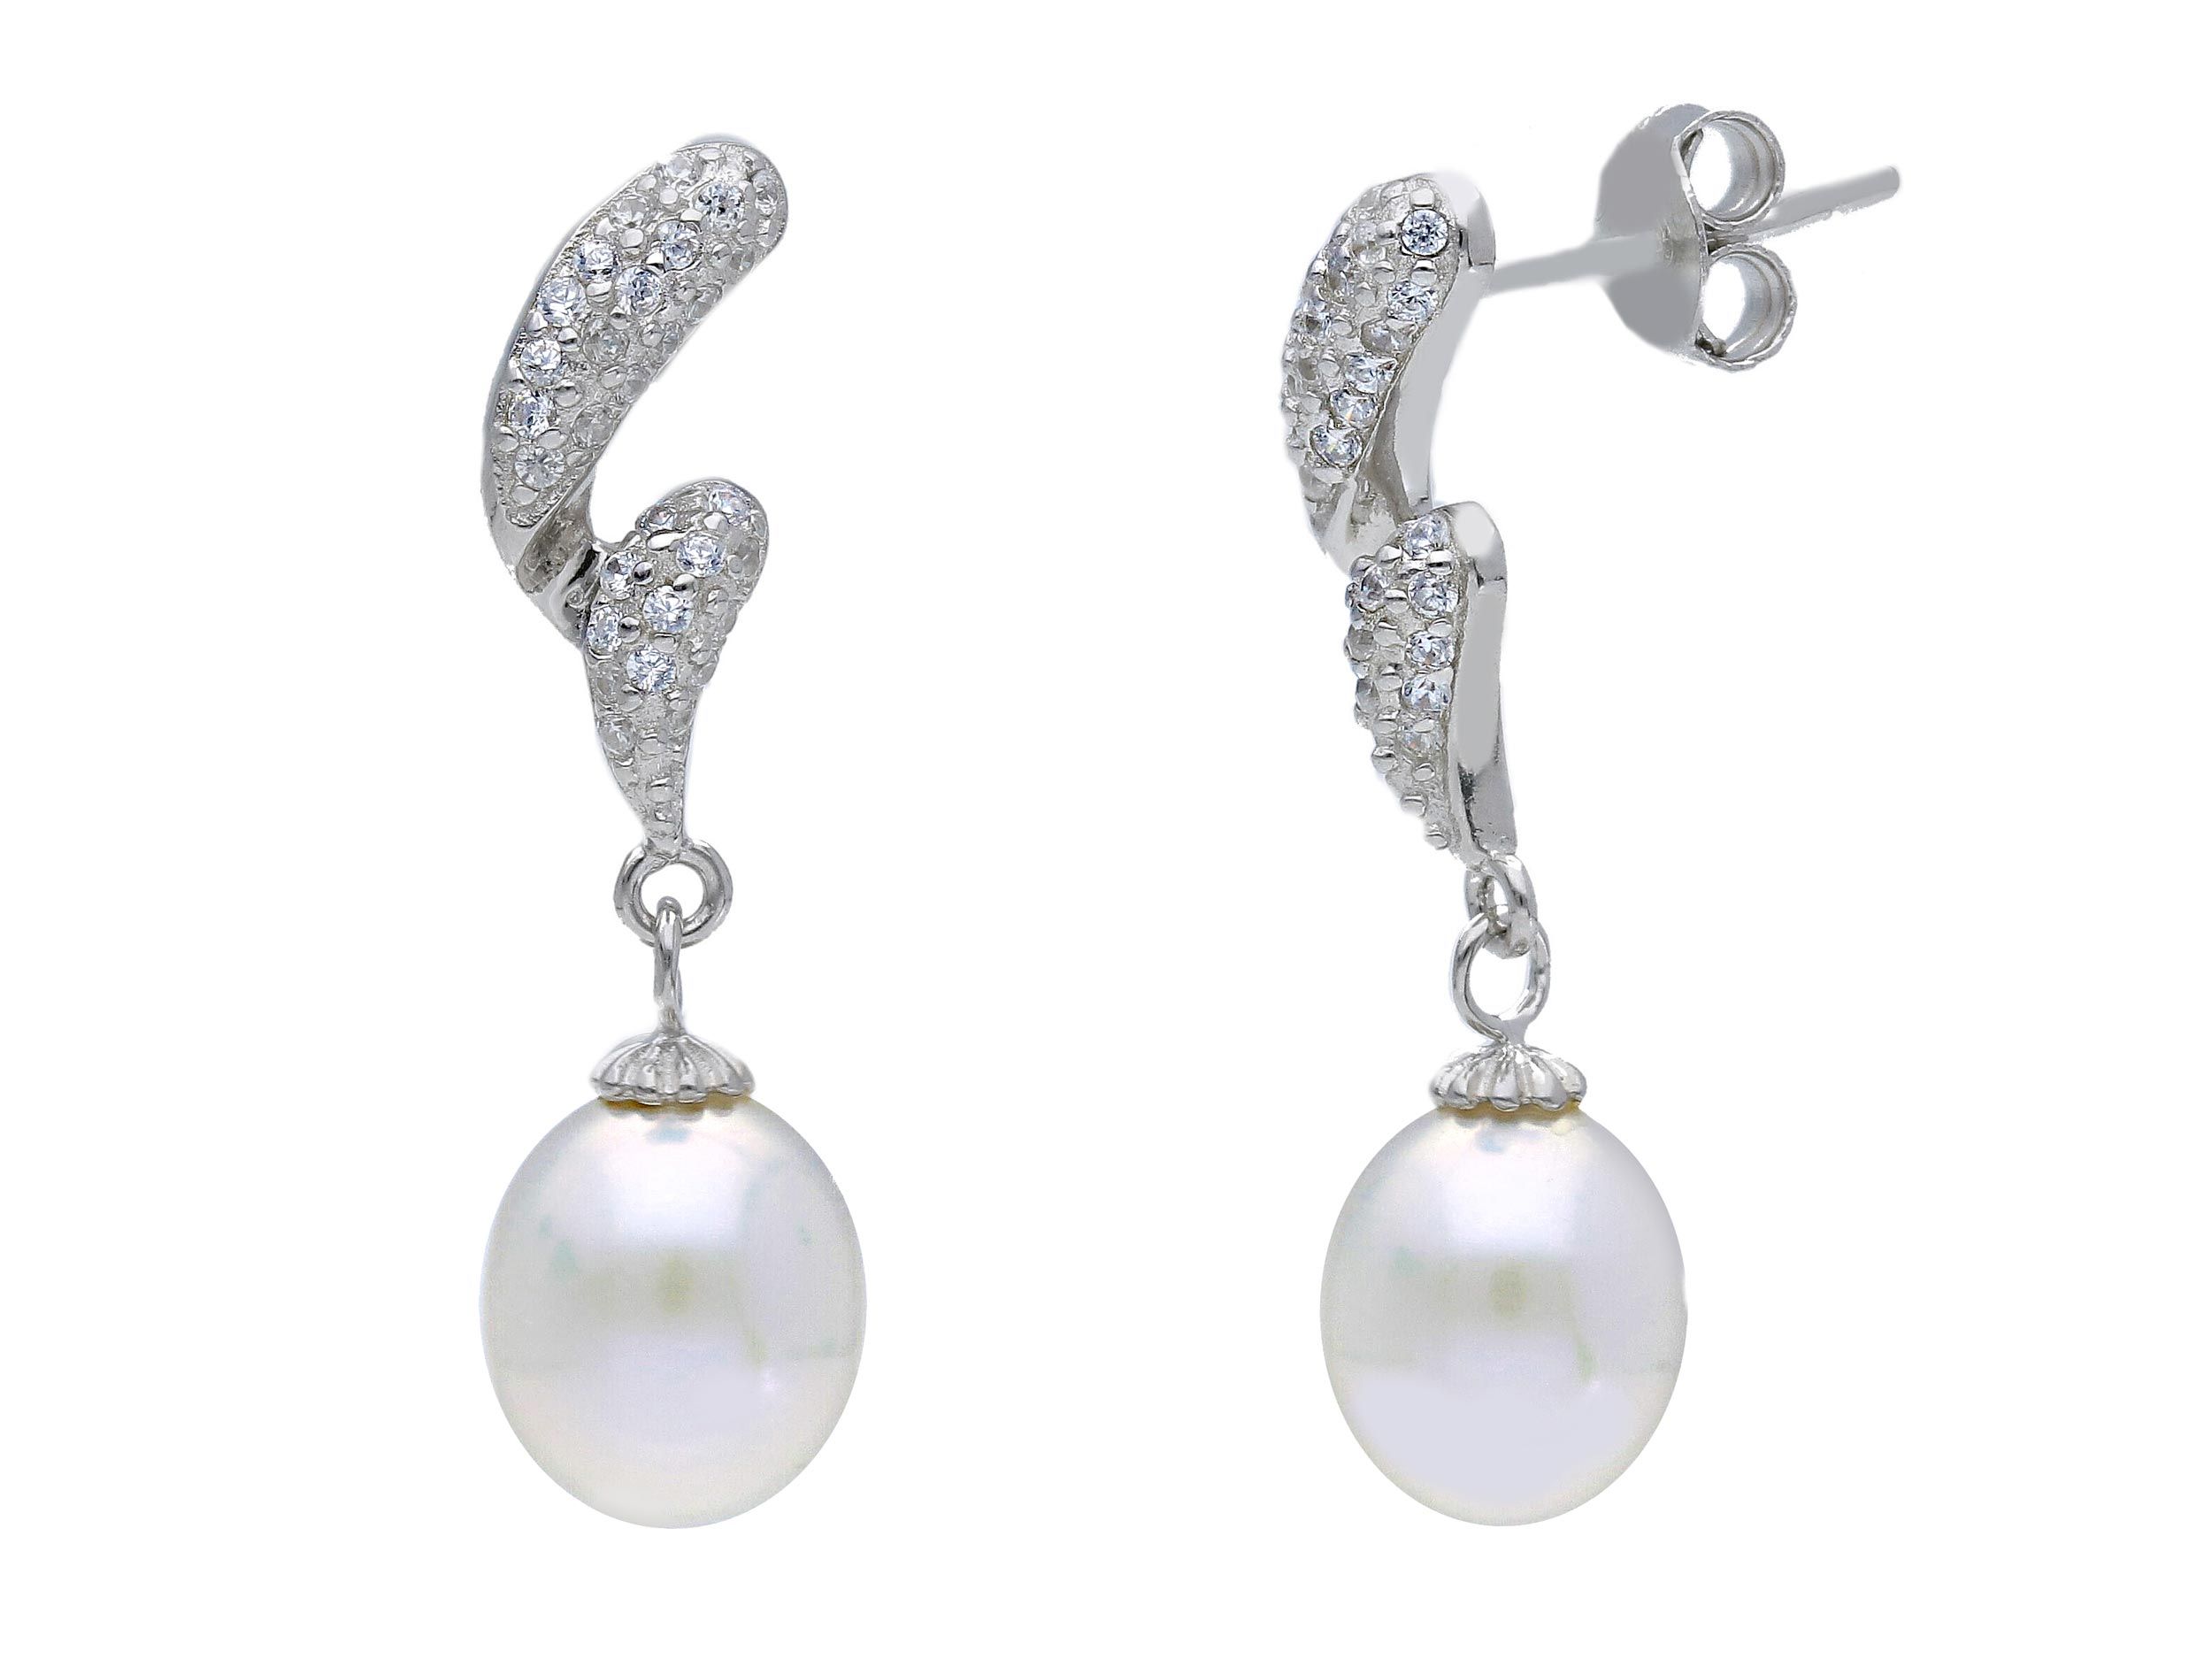  Platinum plated silver 925° earrings (code S230998)